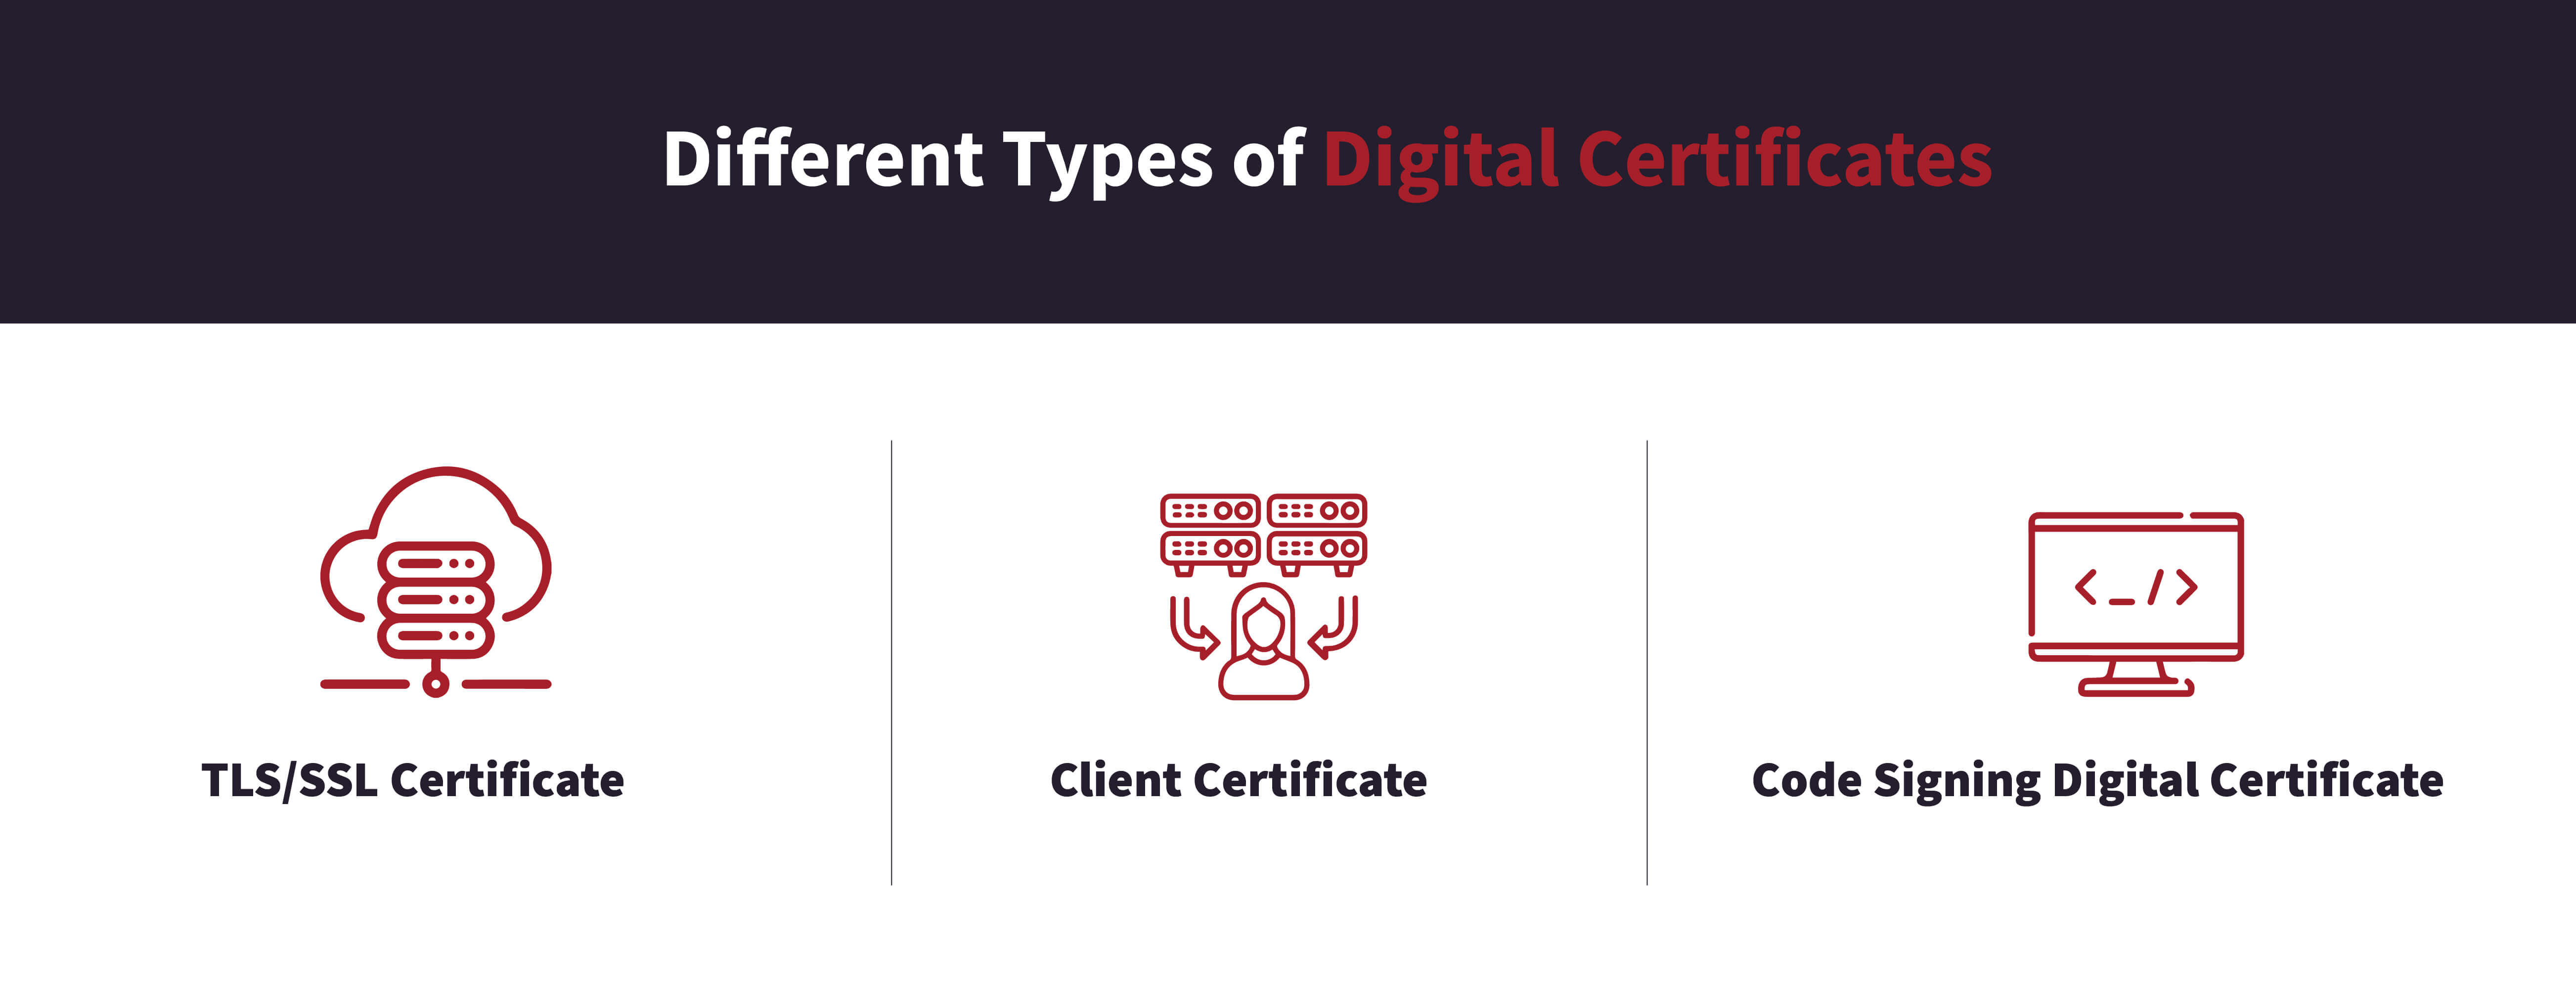 1684-Imagify blog What is a digital certificate_1660-Image-02-A